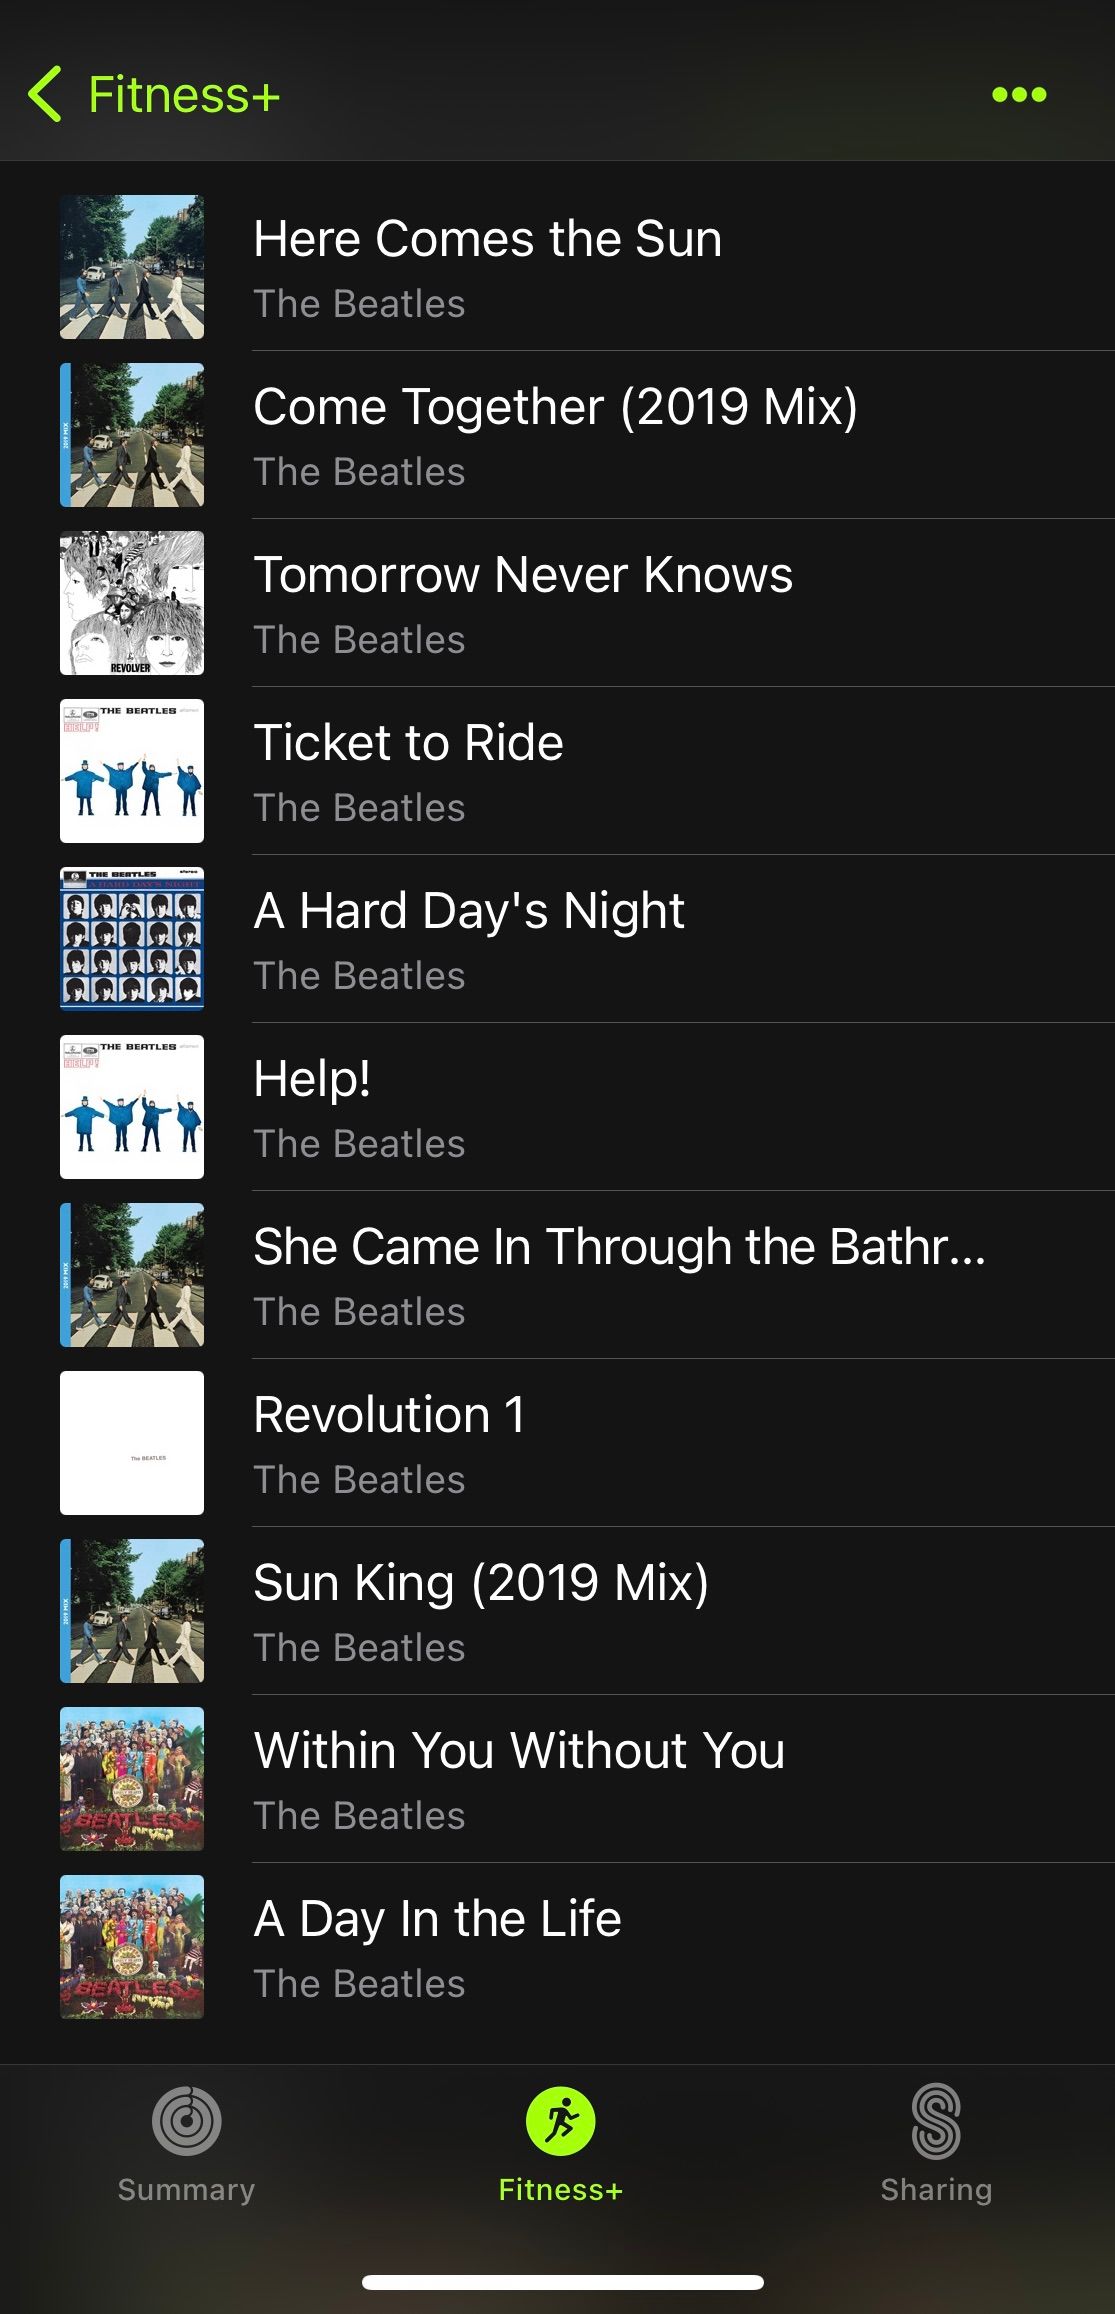 Yoga with the Beatles playlist screenshot from Apple Fitness+ app